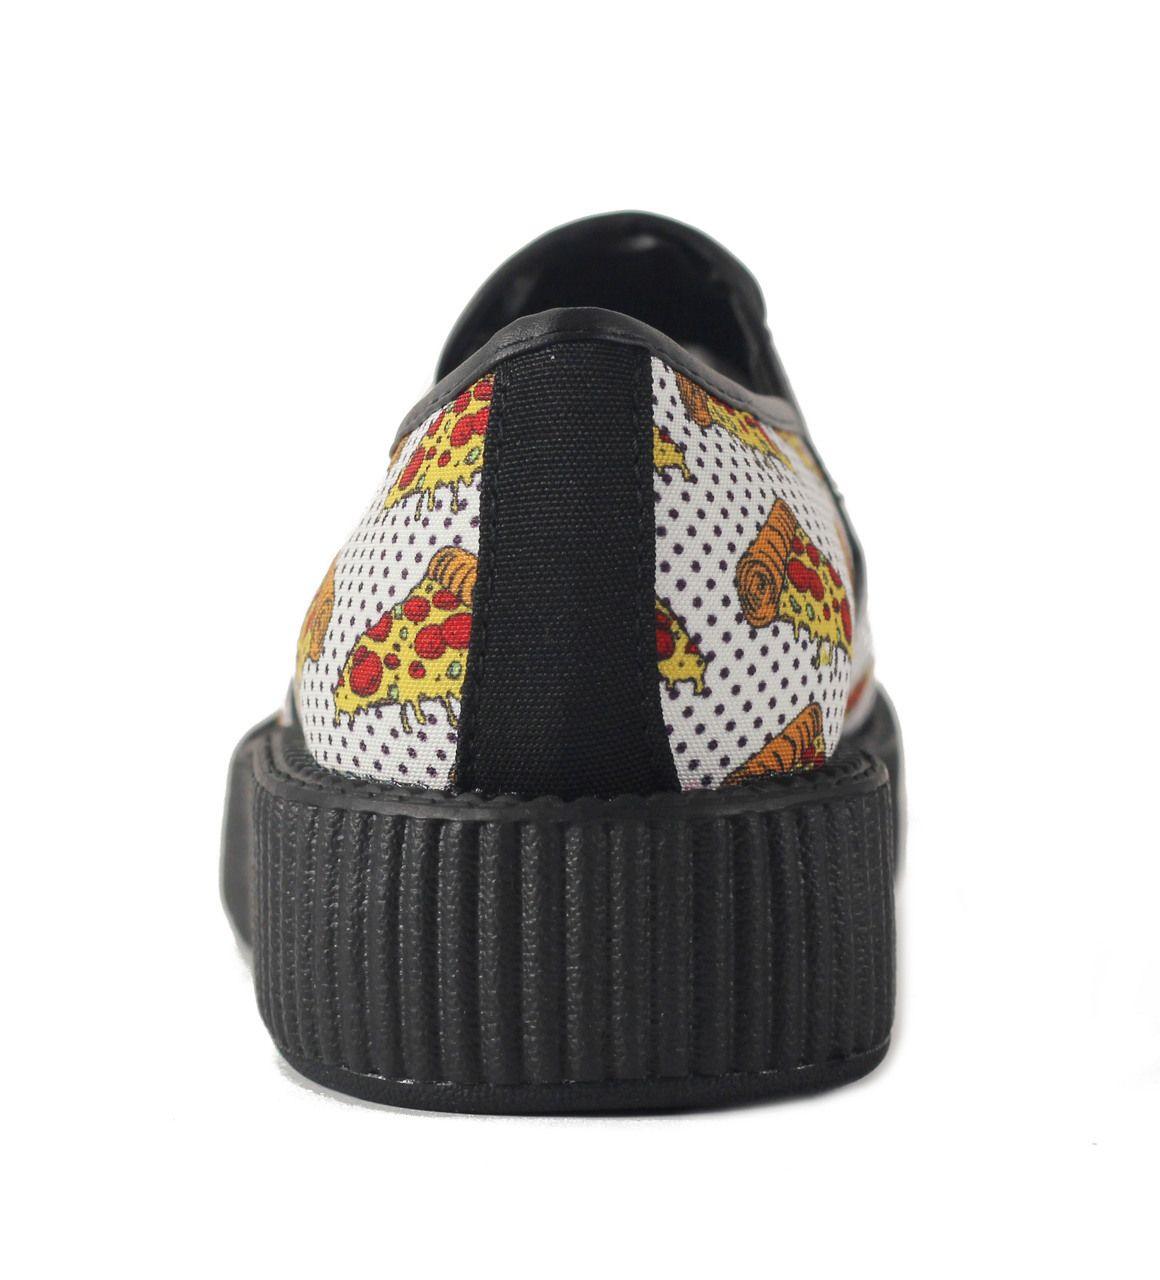 T.U.K. V8892 Creepers Shoes Pizza Slip On  Womens Size US 6 - SVNYFancy